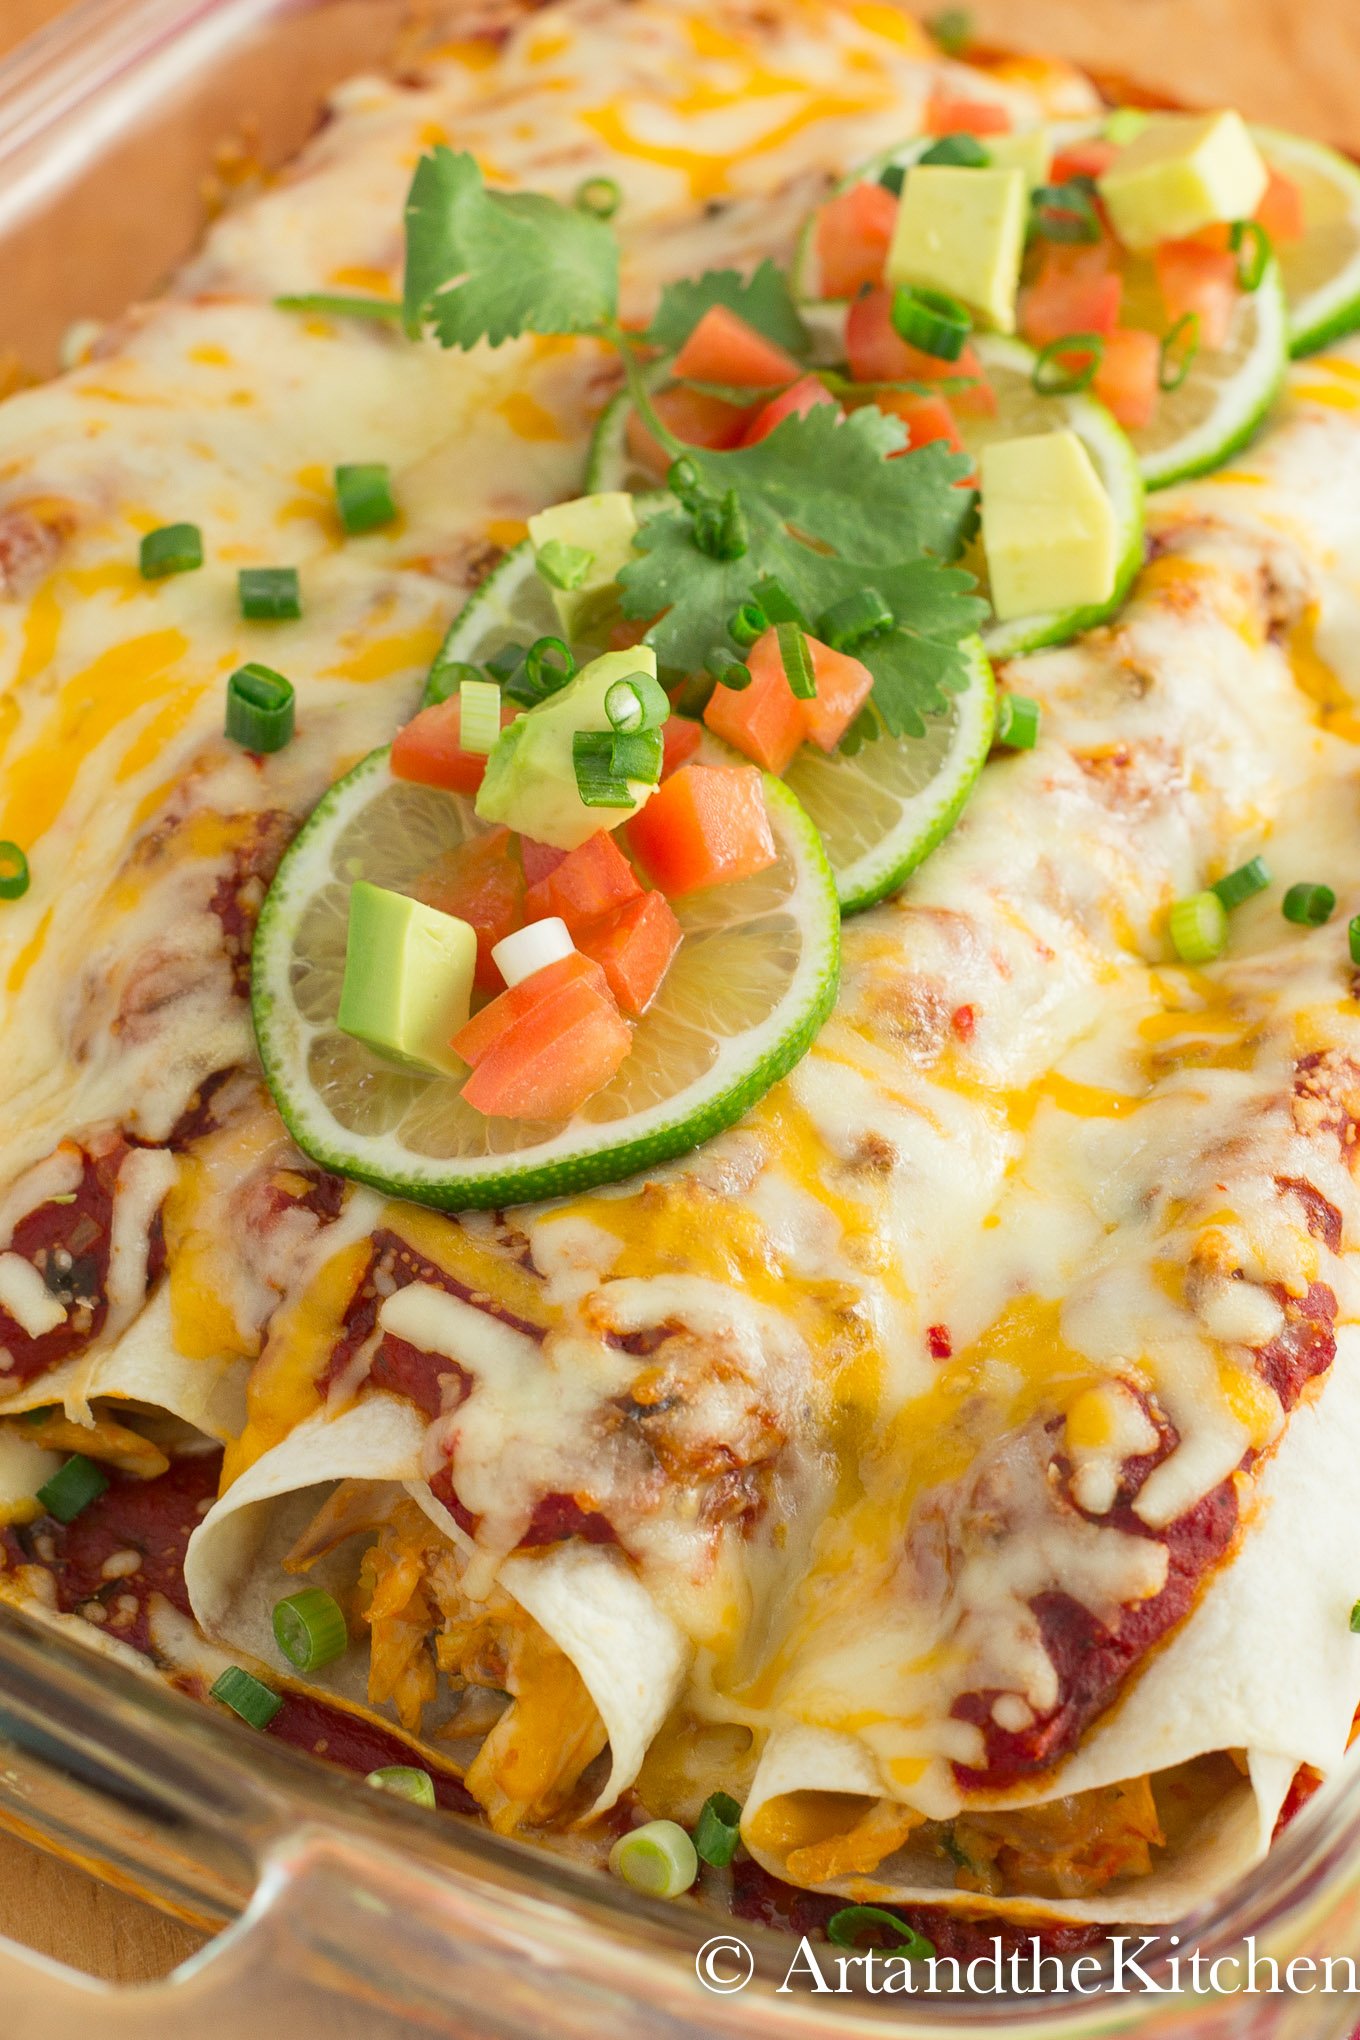 Baking dish of chicken Enchiladas topped with melted cheese, lime slices and chucks of avocado, tomatoes and green onions.